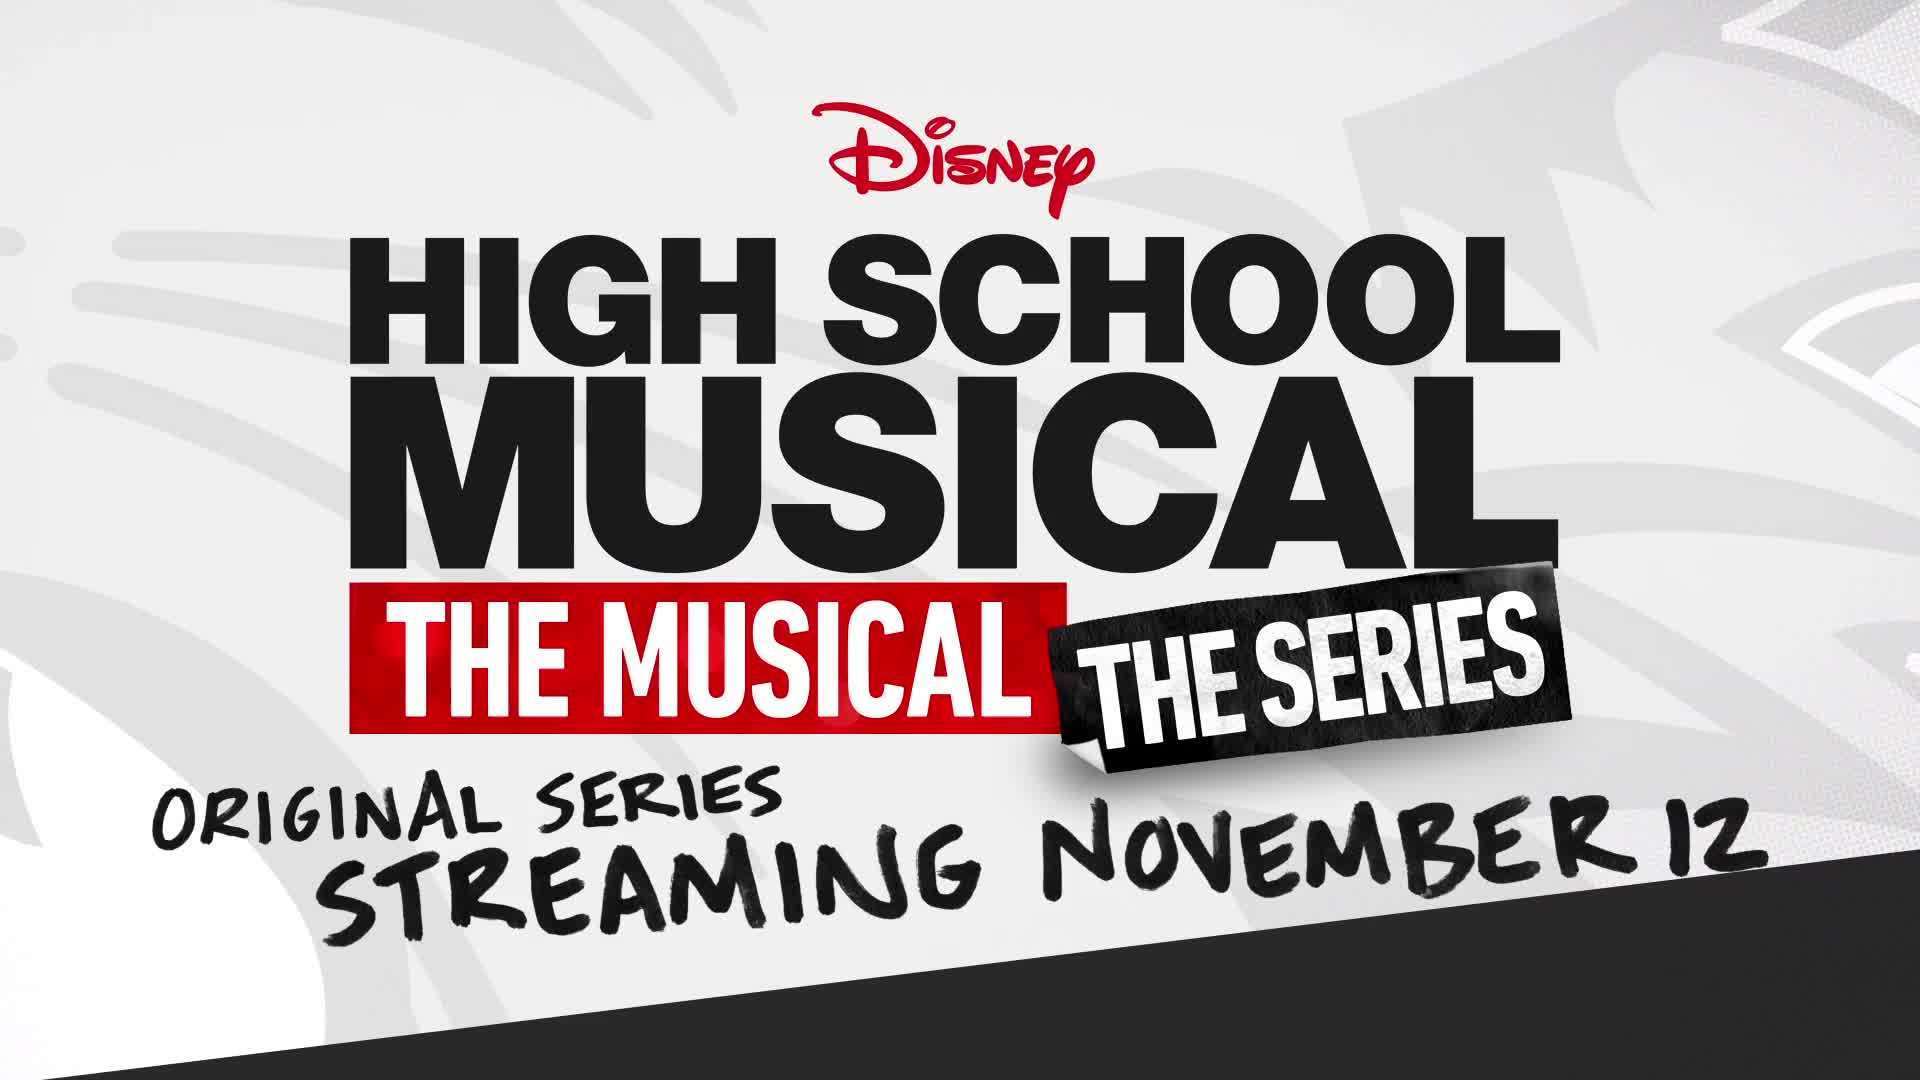 High School Musical: The Musical: The Series | Official Trailer | Disney+ | Streaming November 12